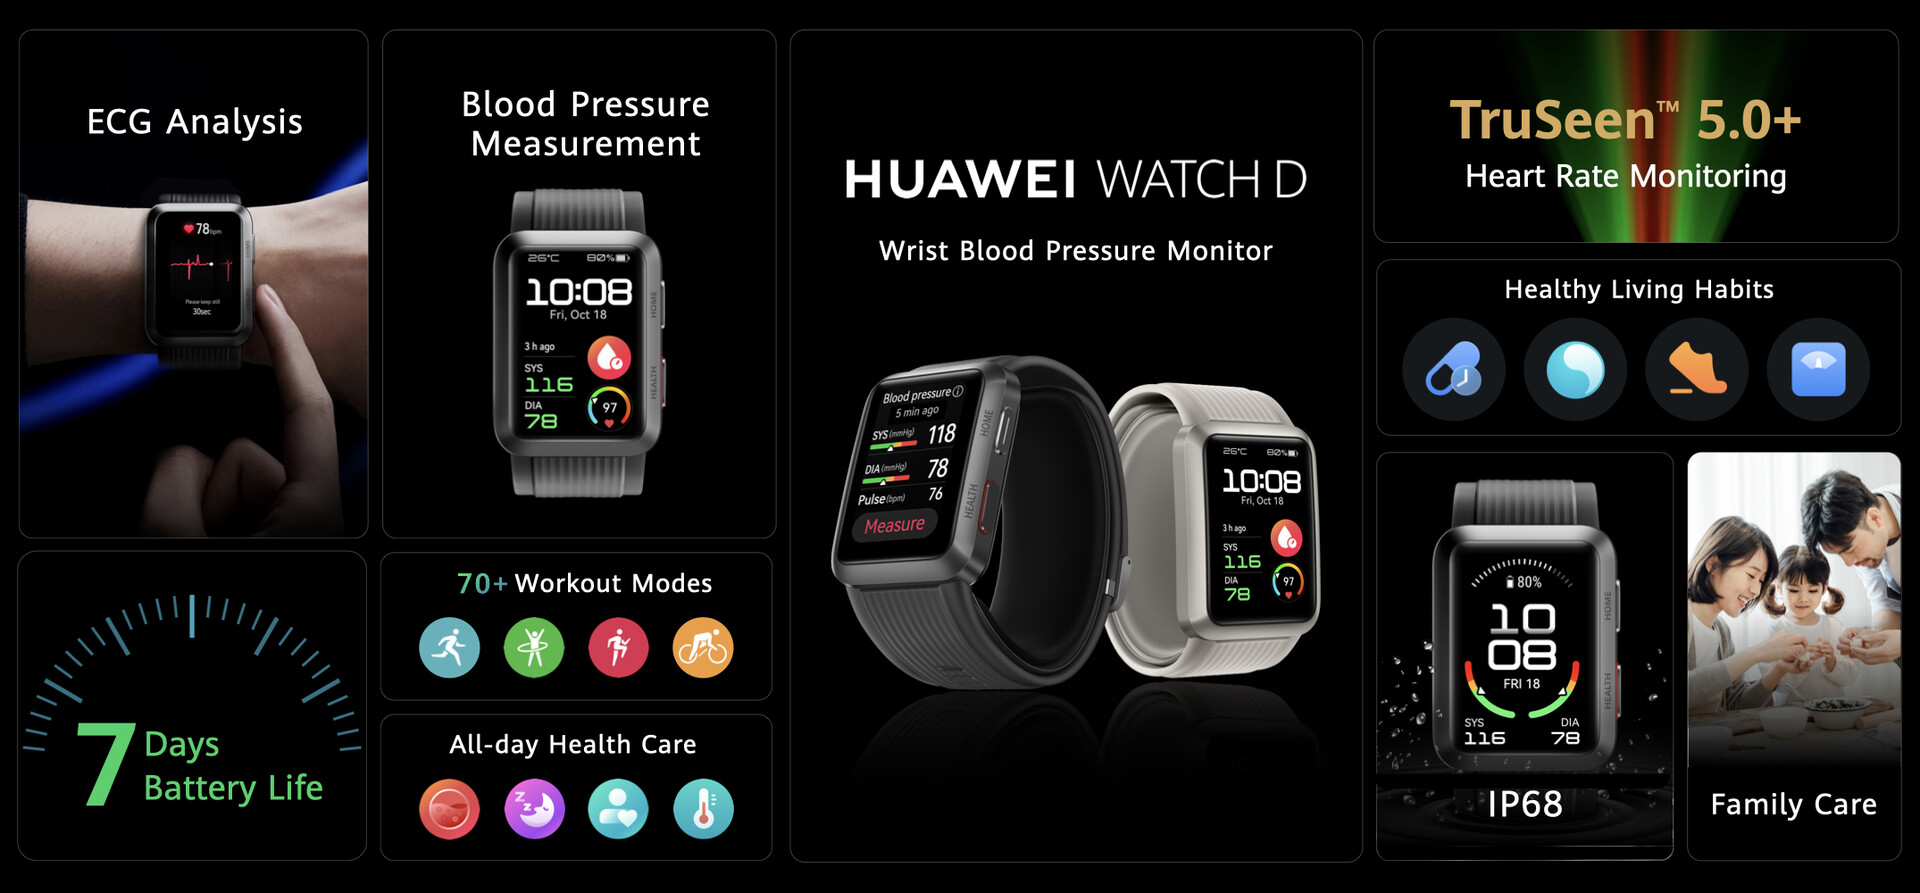 Huawei Watch D: Smartwatch with blood pressure measurement capabilities and  ECG analysis is coming to Europe -  News